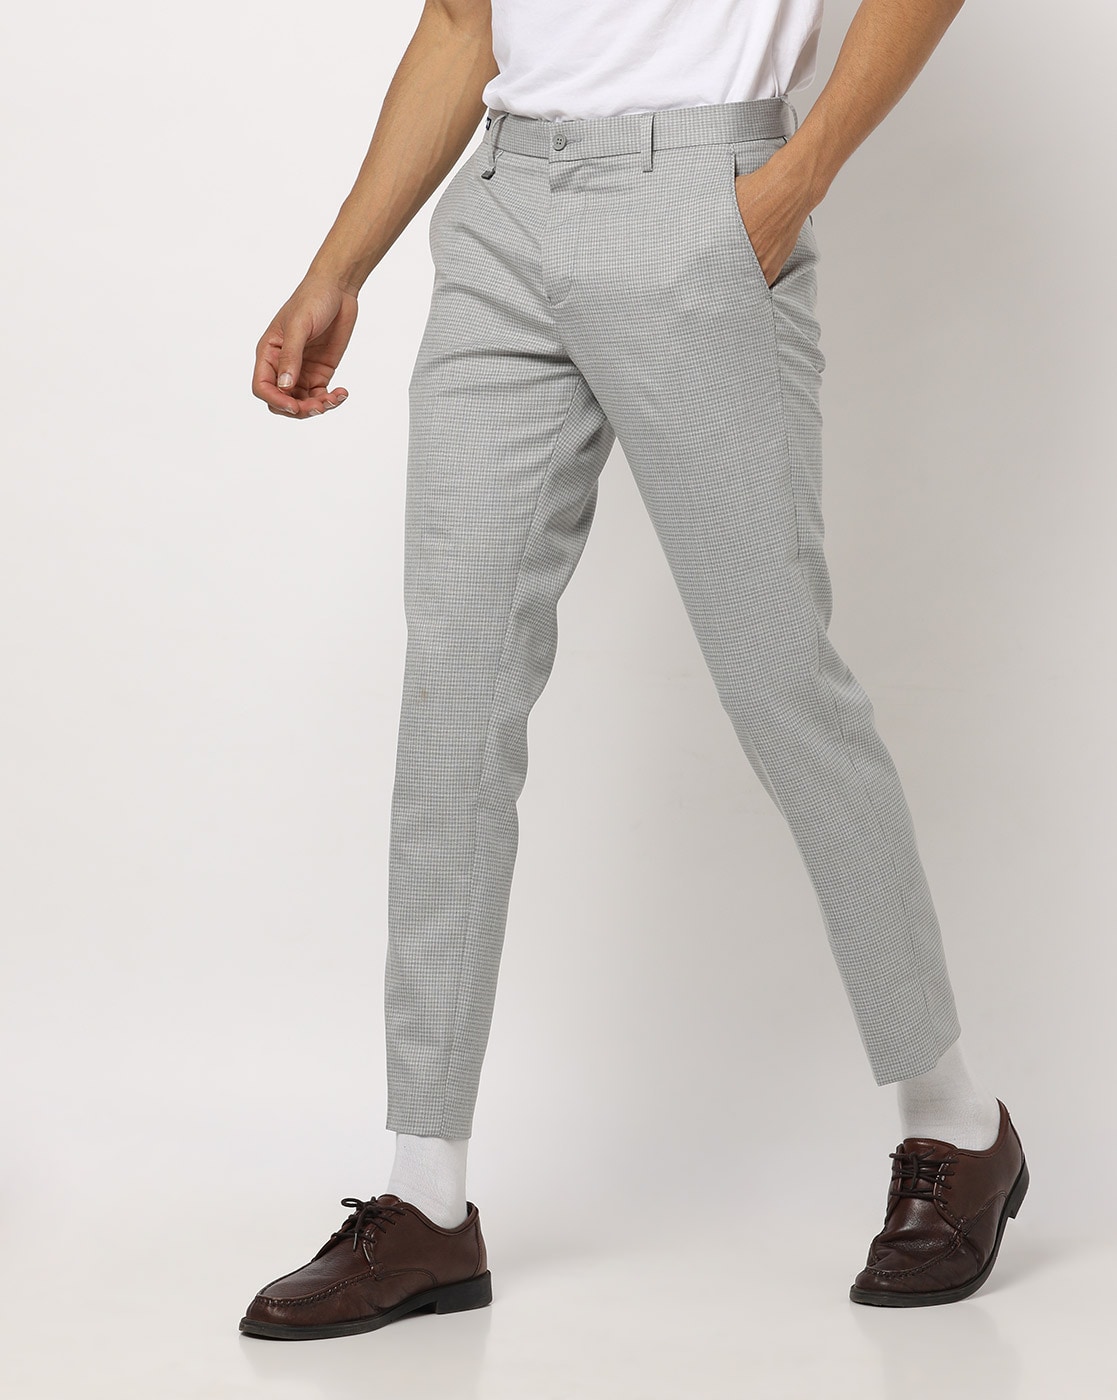 How to Wear Cropped Pants for Men  Dapper Confidential